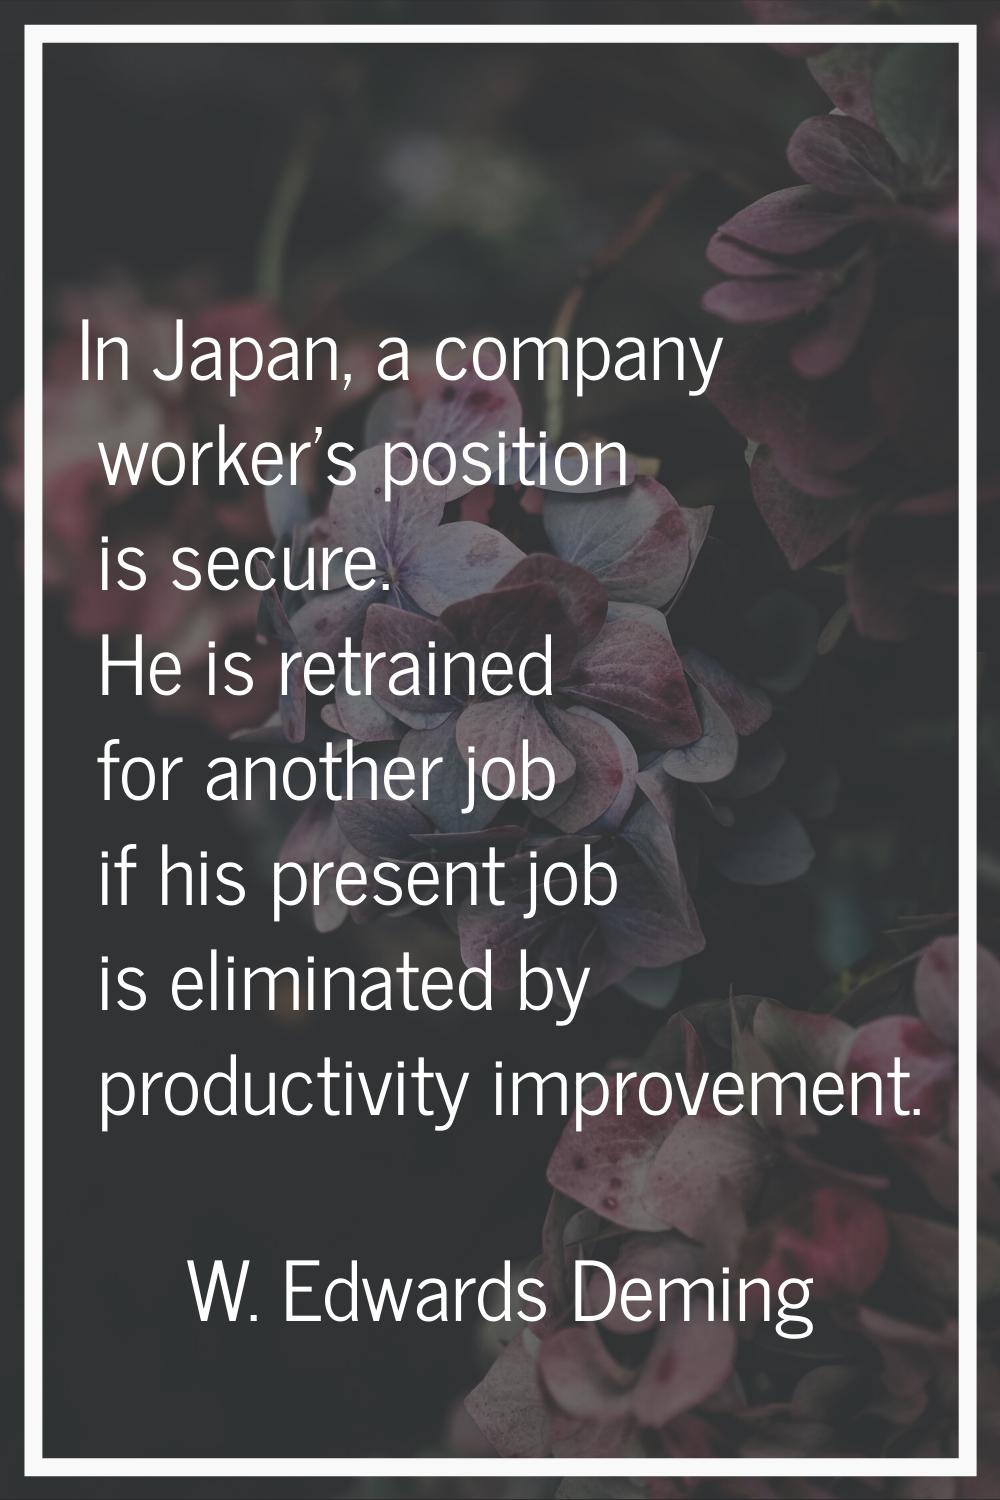 In Japan, a company worker's position is secure. He is retrained for another job if his present job